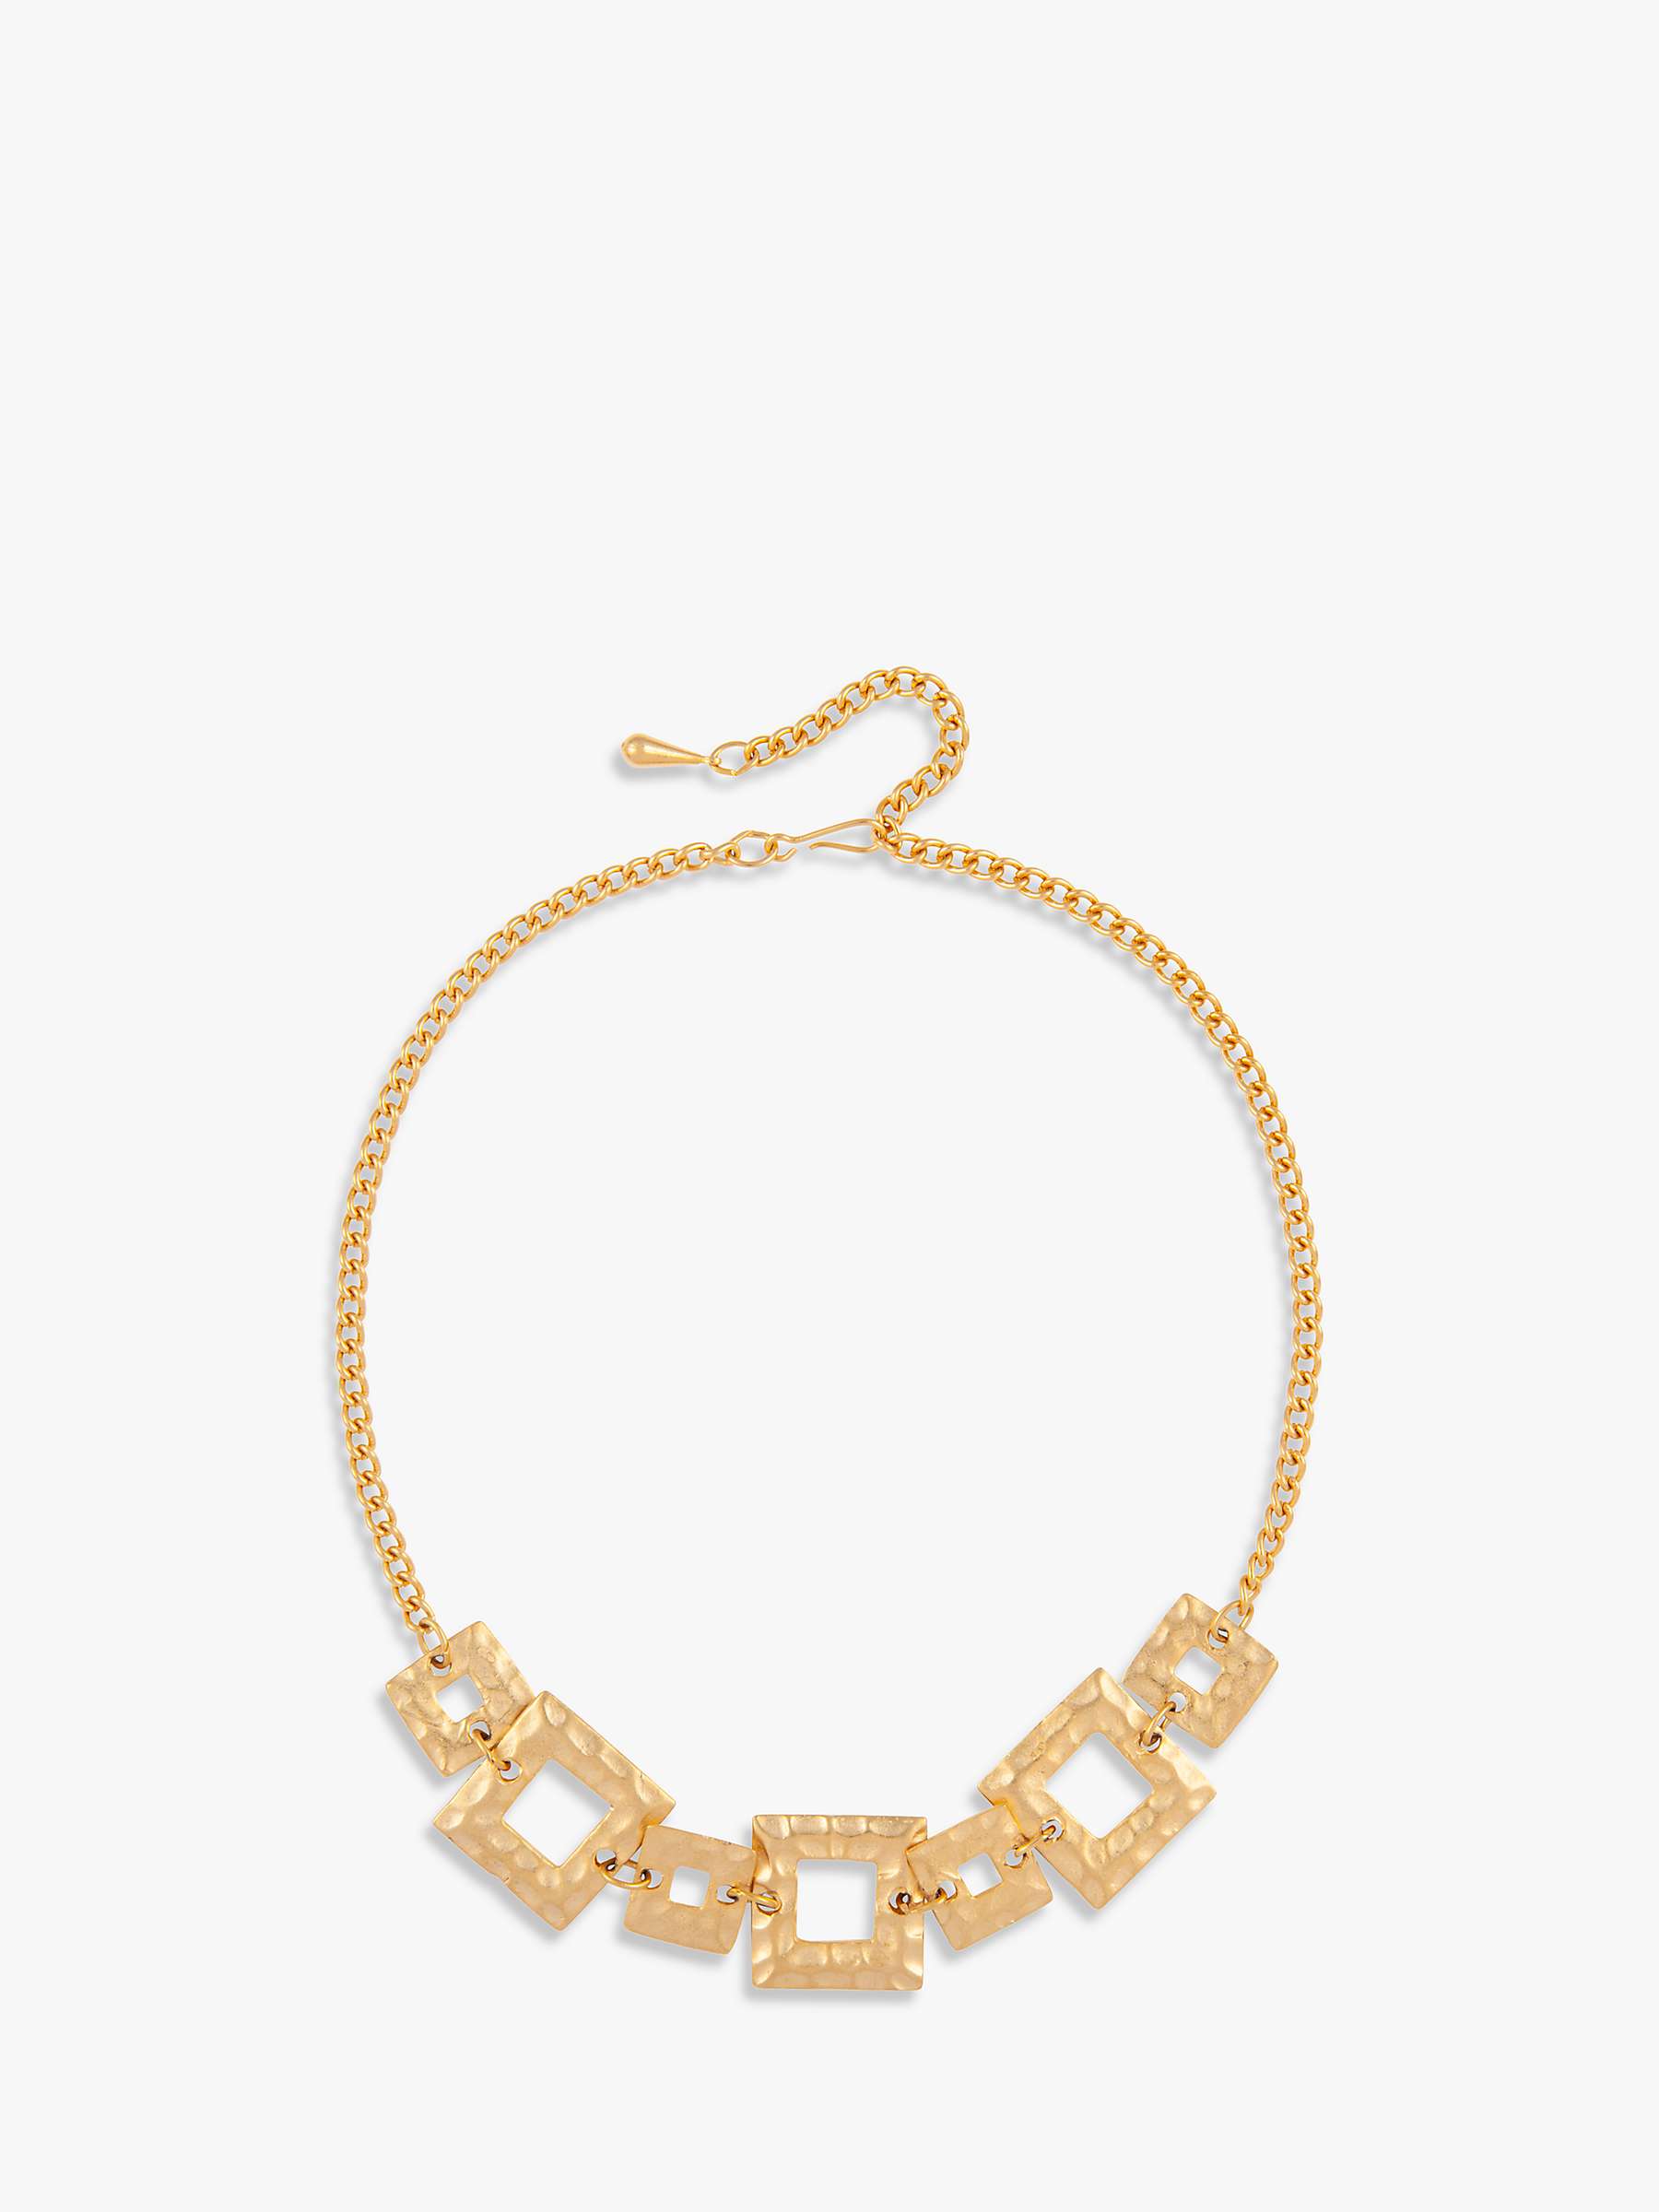 Buy Susan Caplan Vintage Rediscovered Collection Geometric Links Chain Necklace, Gold Online at johnlewis.com